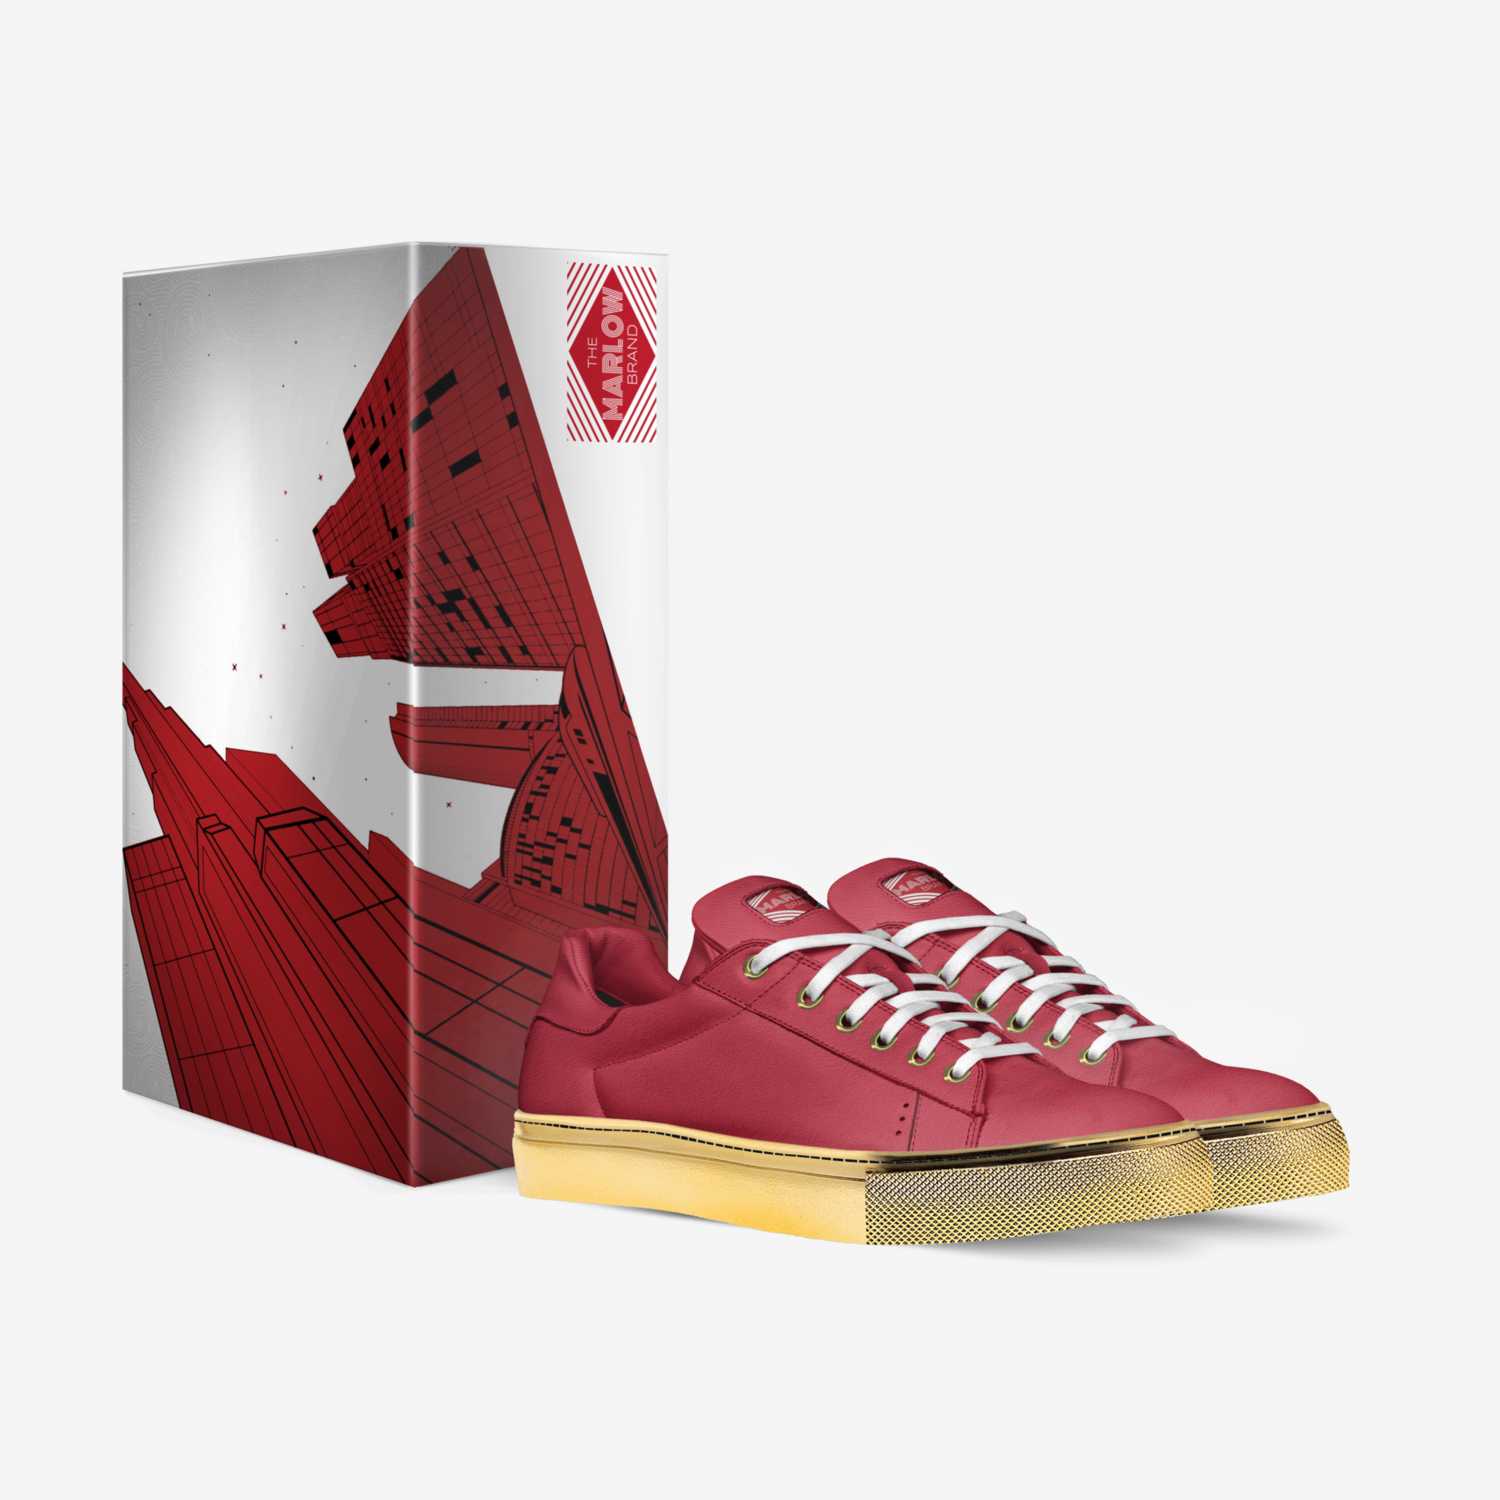 Maple Lane (Red) custom made in Italy shoes by The Marlow Brand | Box view